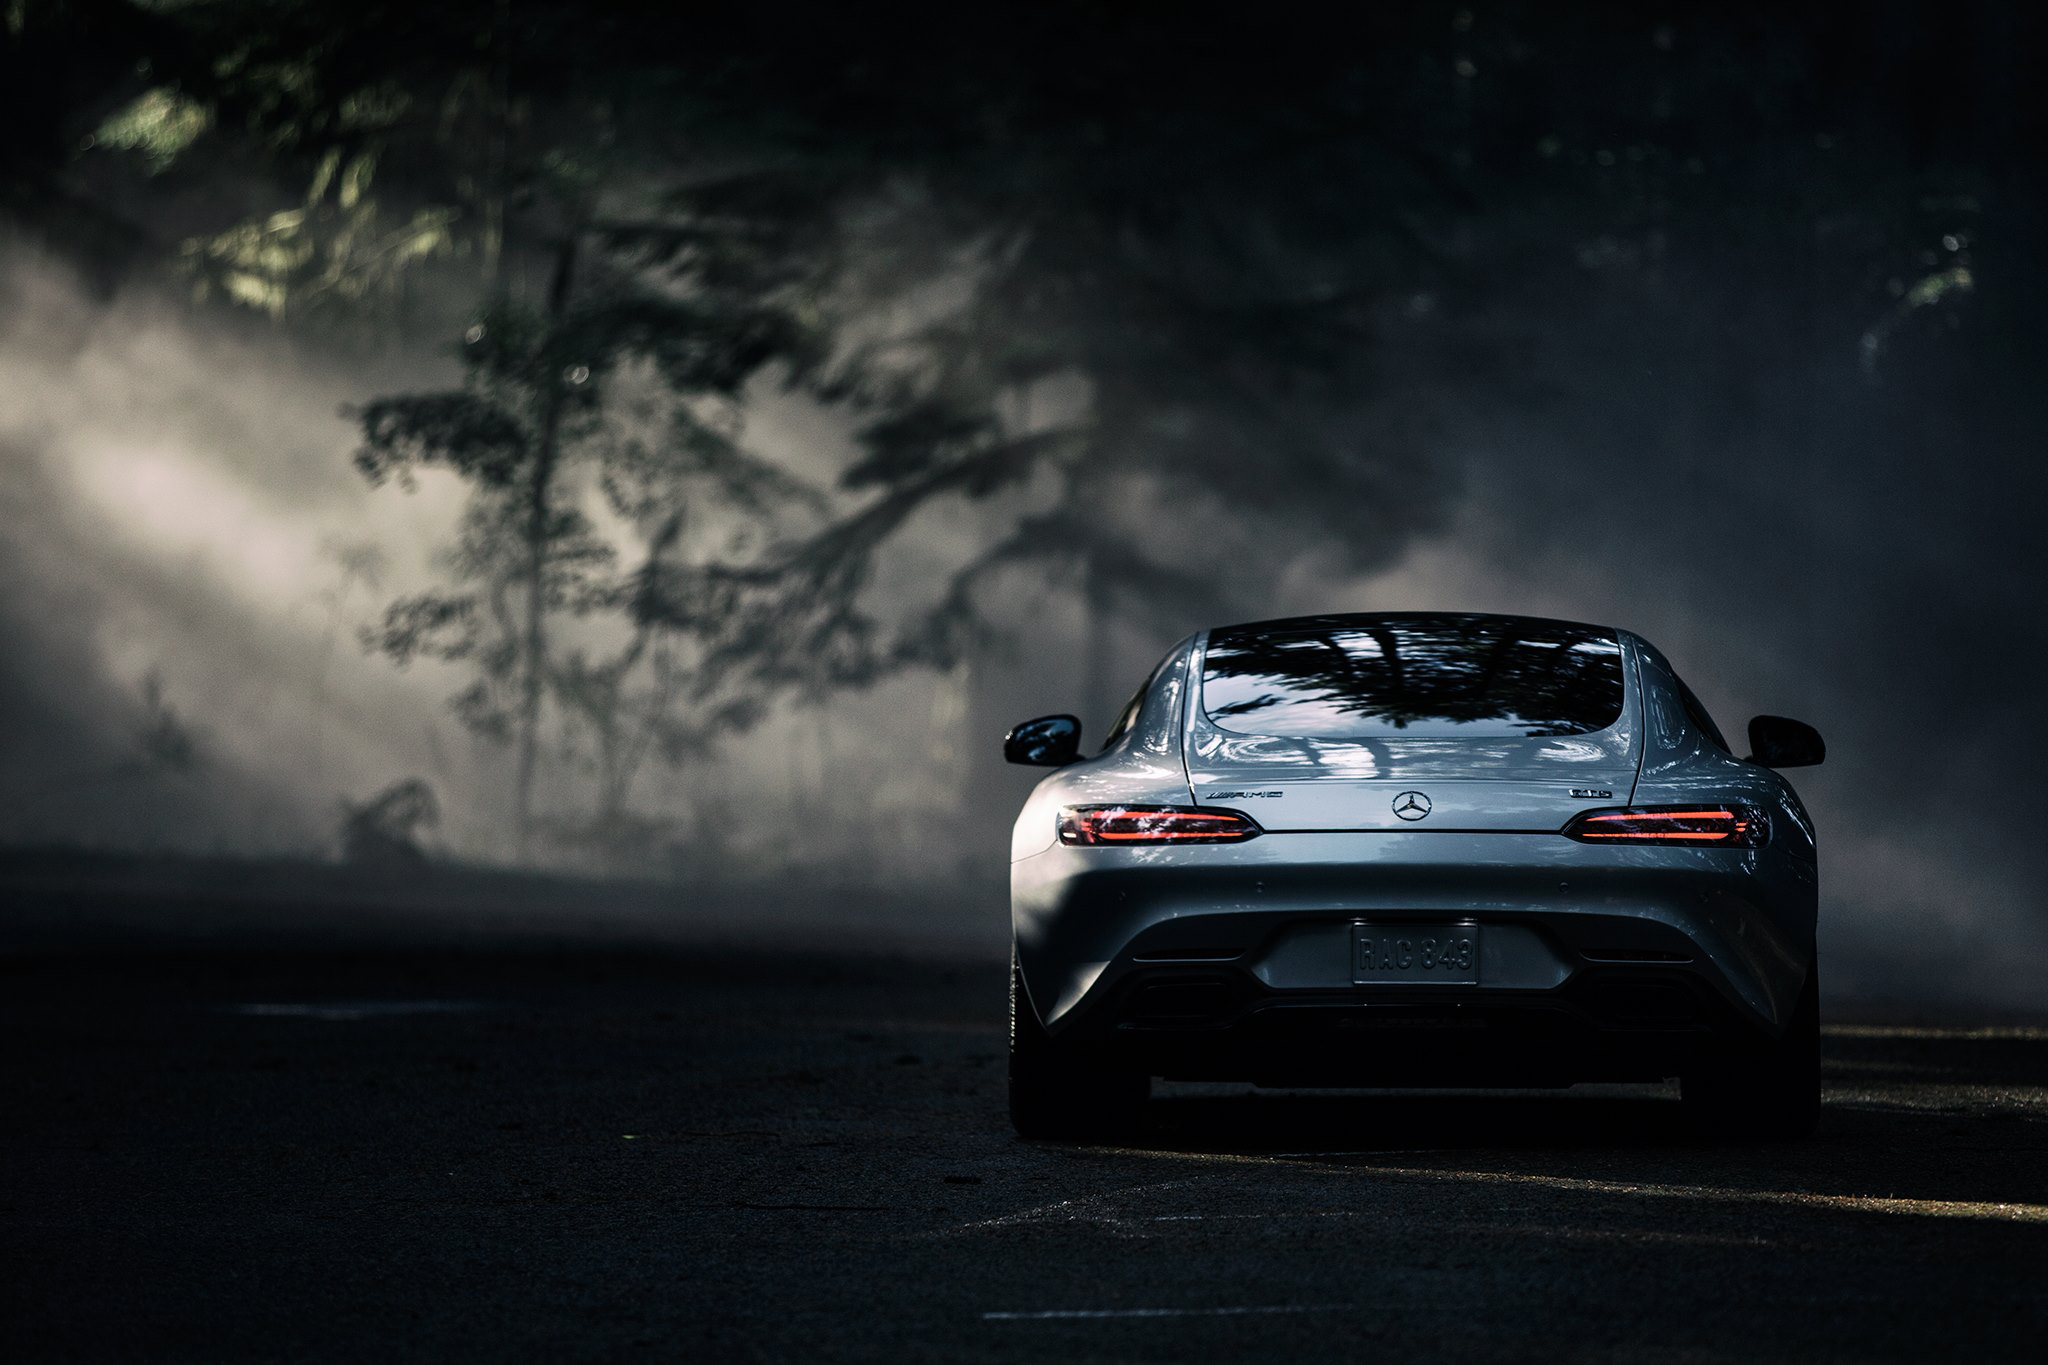 cars, mercedes benz, back view, rear view, amg, gt s, 2016 UHD